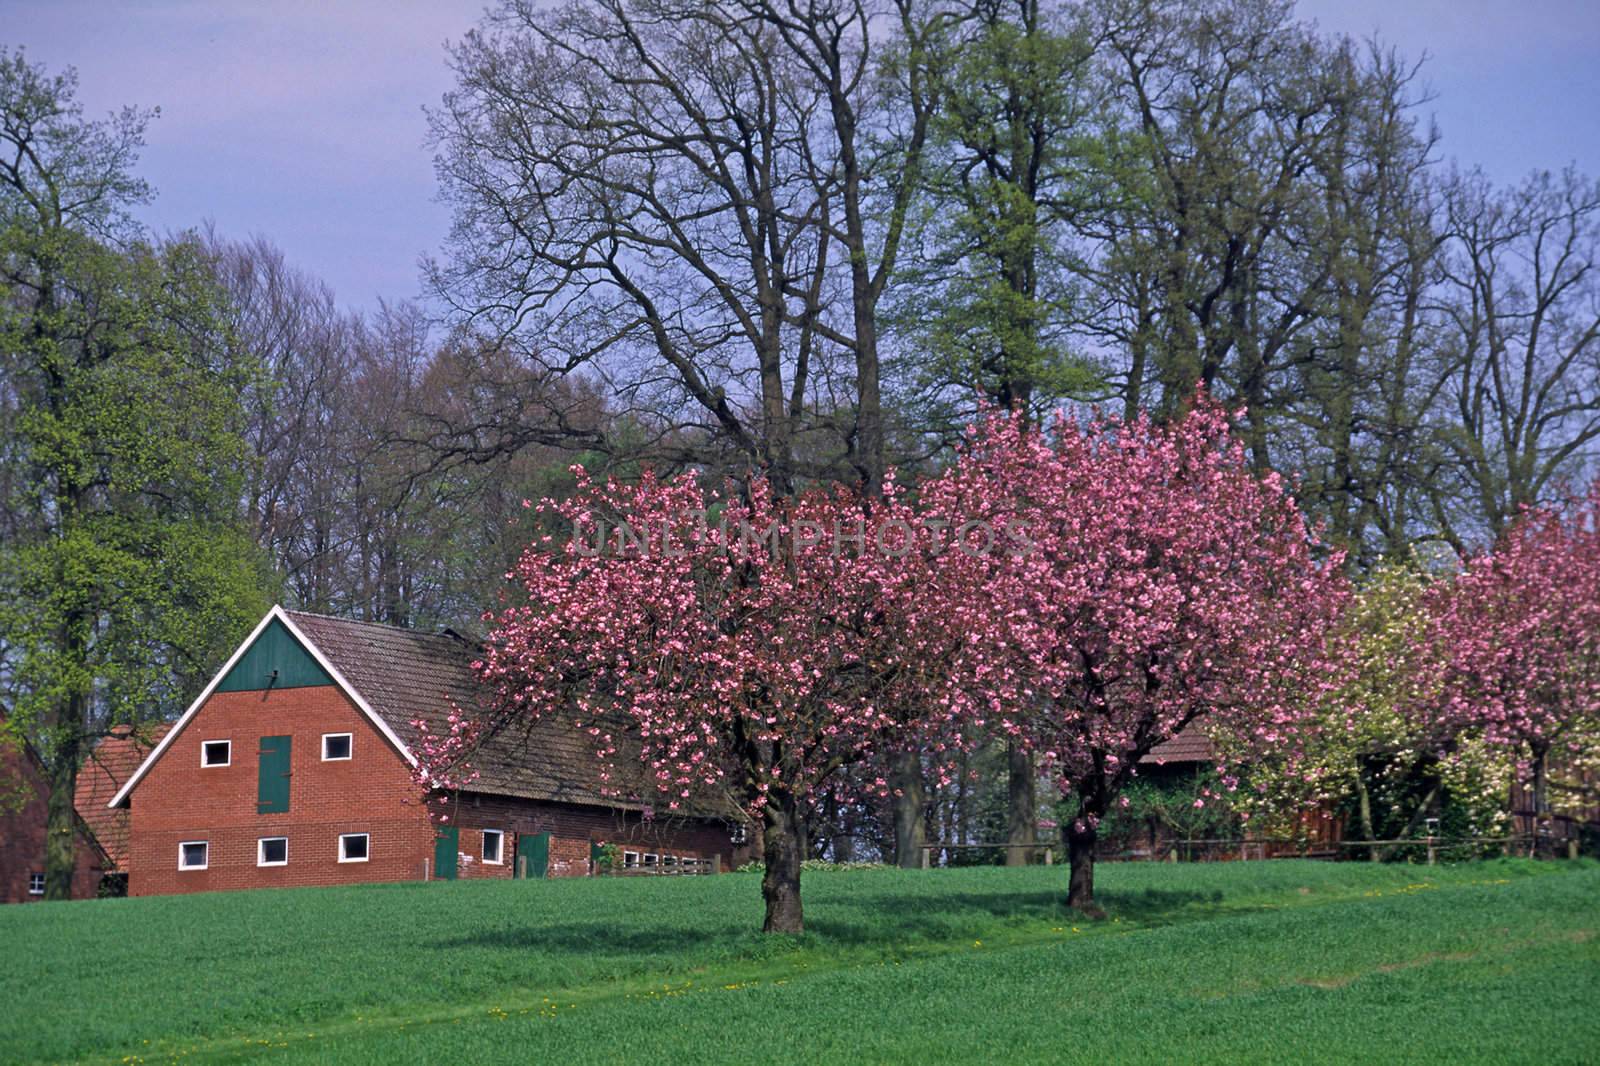 Timbered house in Holperdorp in spring with cherry trees, Tecklenburger Land, North Rhine-Westphalia, Germany.